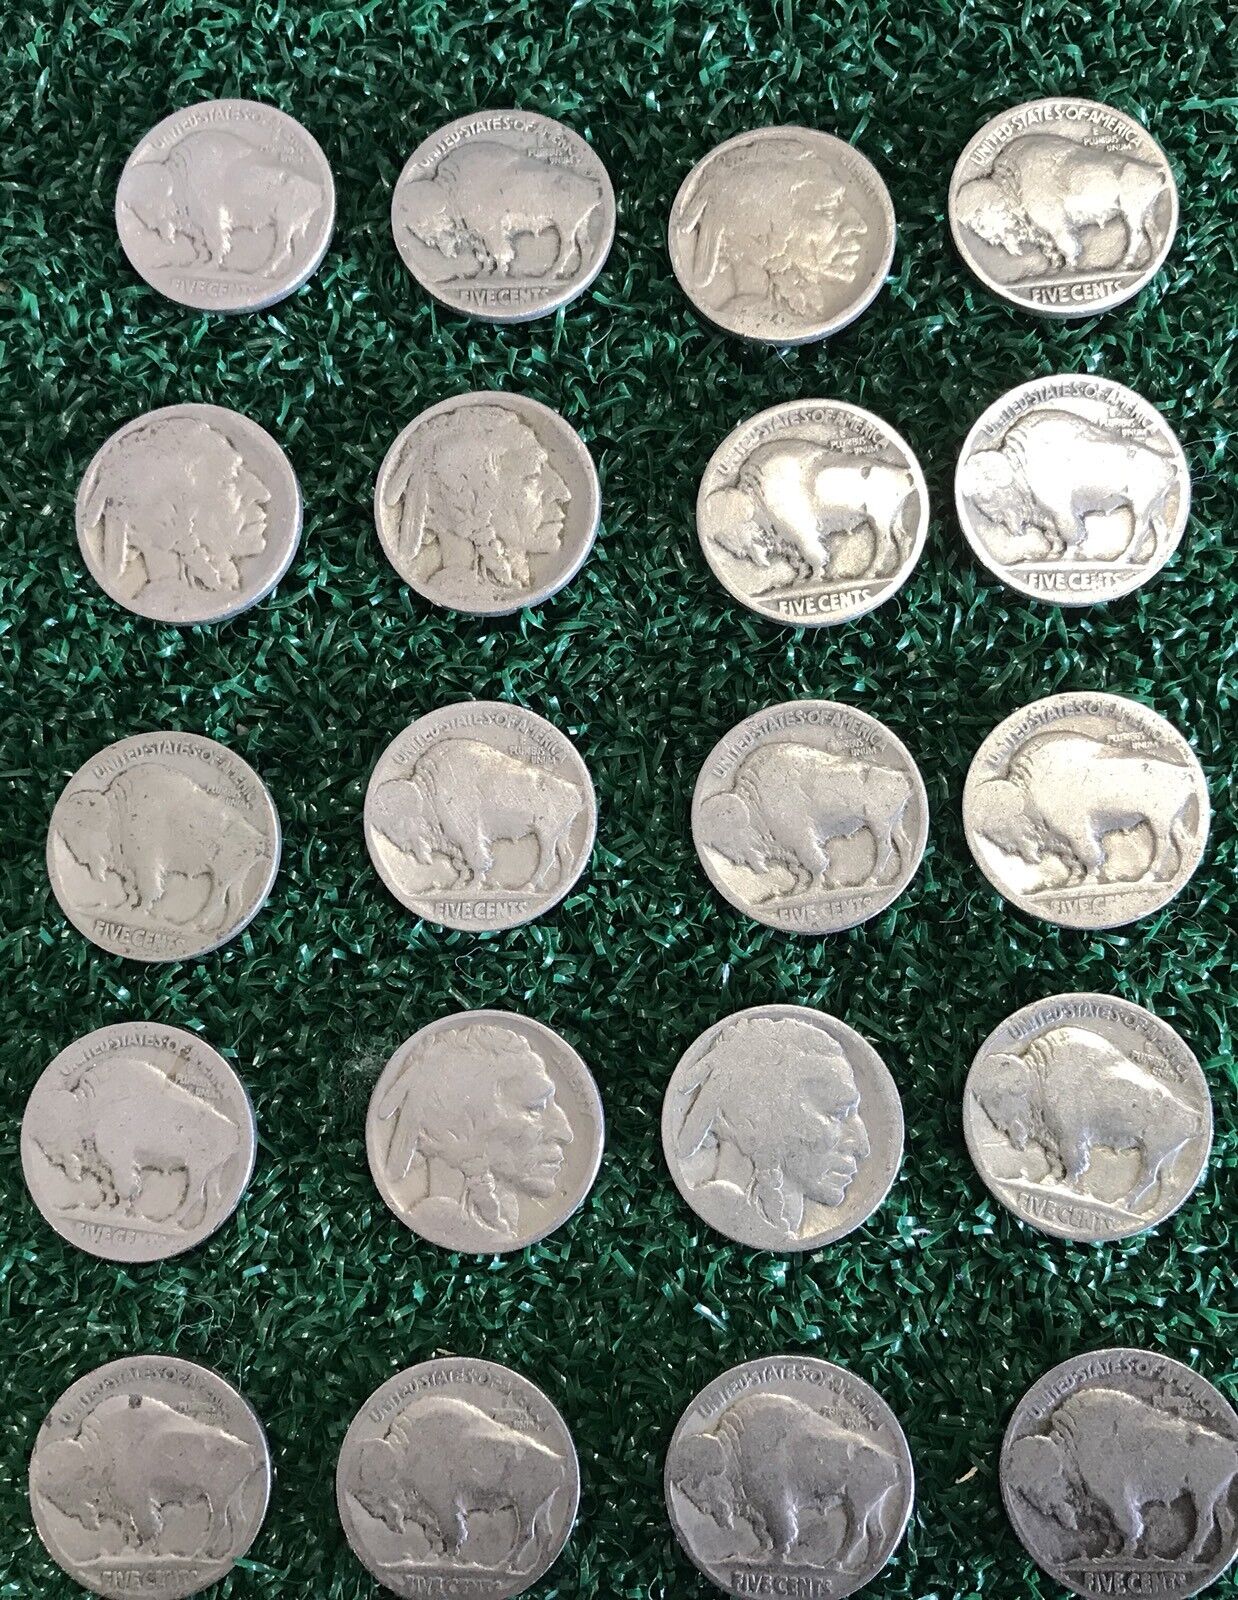 VINTAGE United States Coin Lot of 20 Buffalo Nickels 1913-1938 Dateless Fast Sh Без бренда